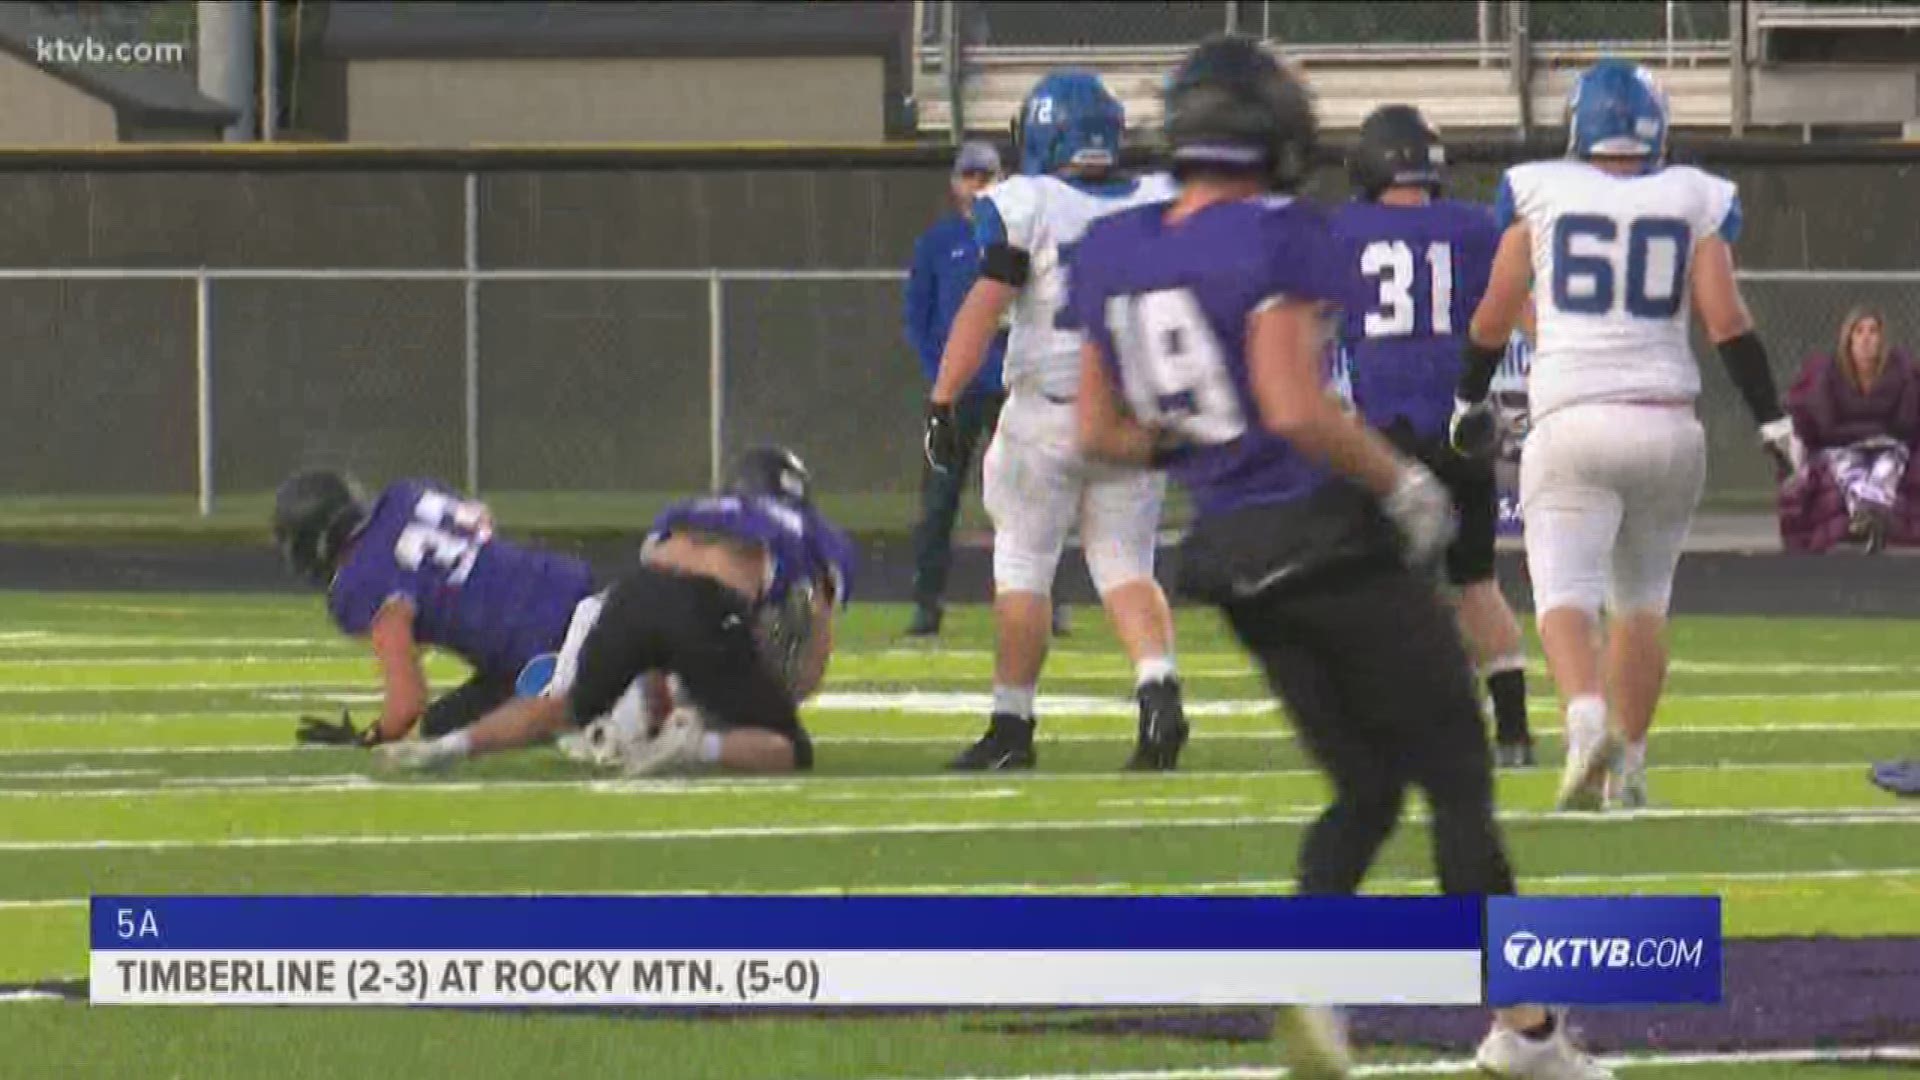 In this Class 5A matchup, the undefeated Grizzlies took on the Timberline Wolves. Rocky Mountain goes onto to win 21-0.